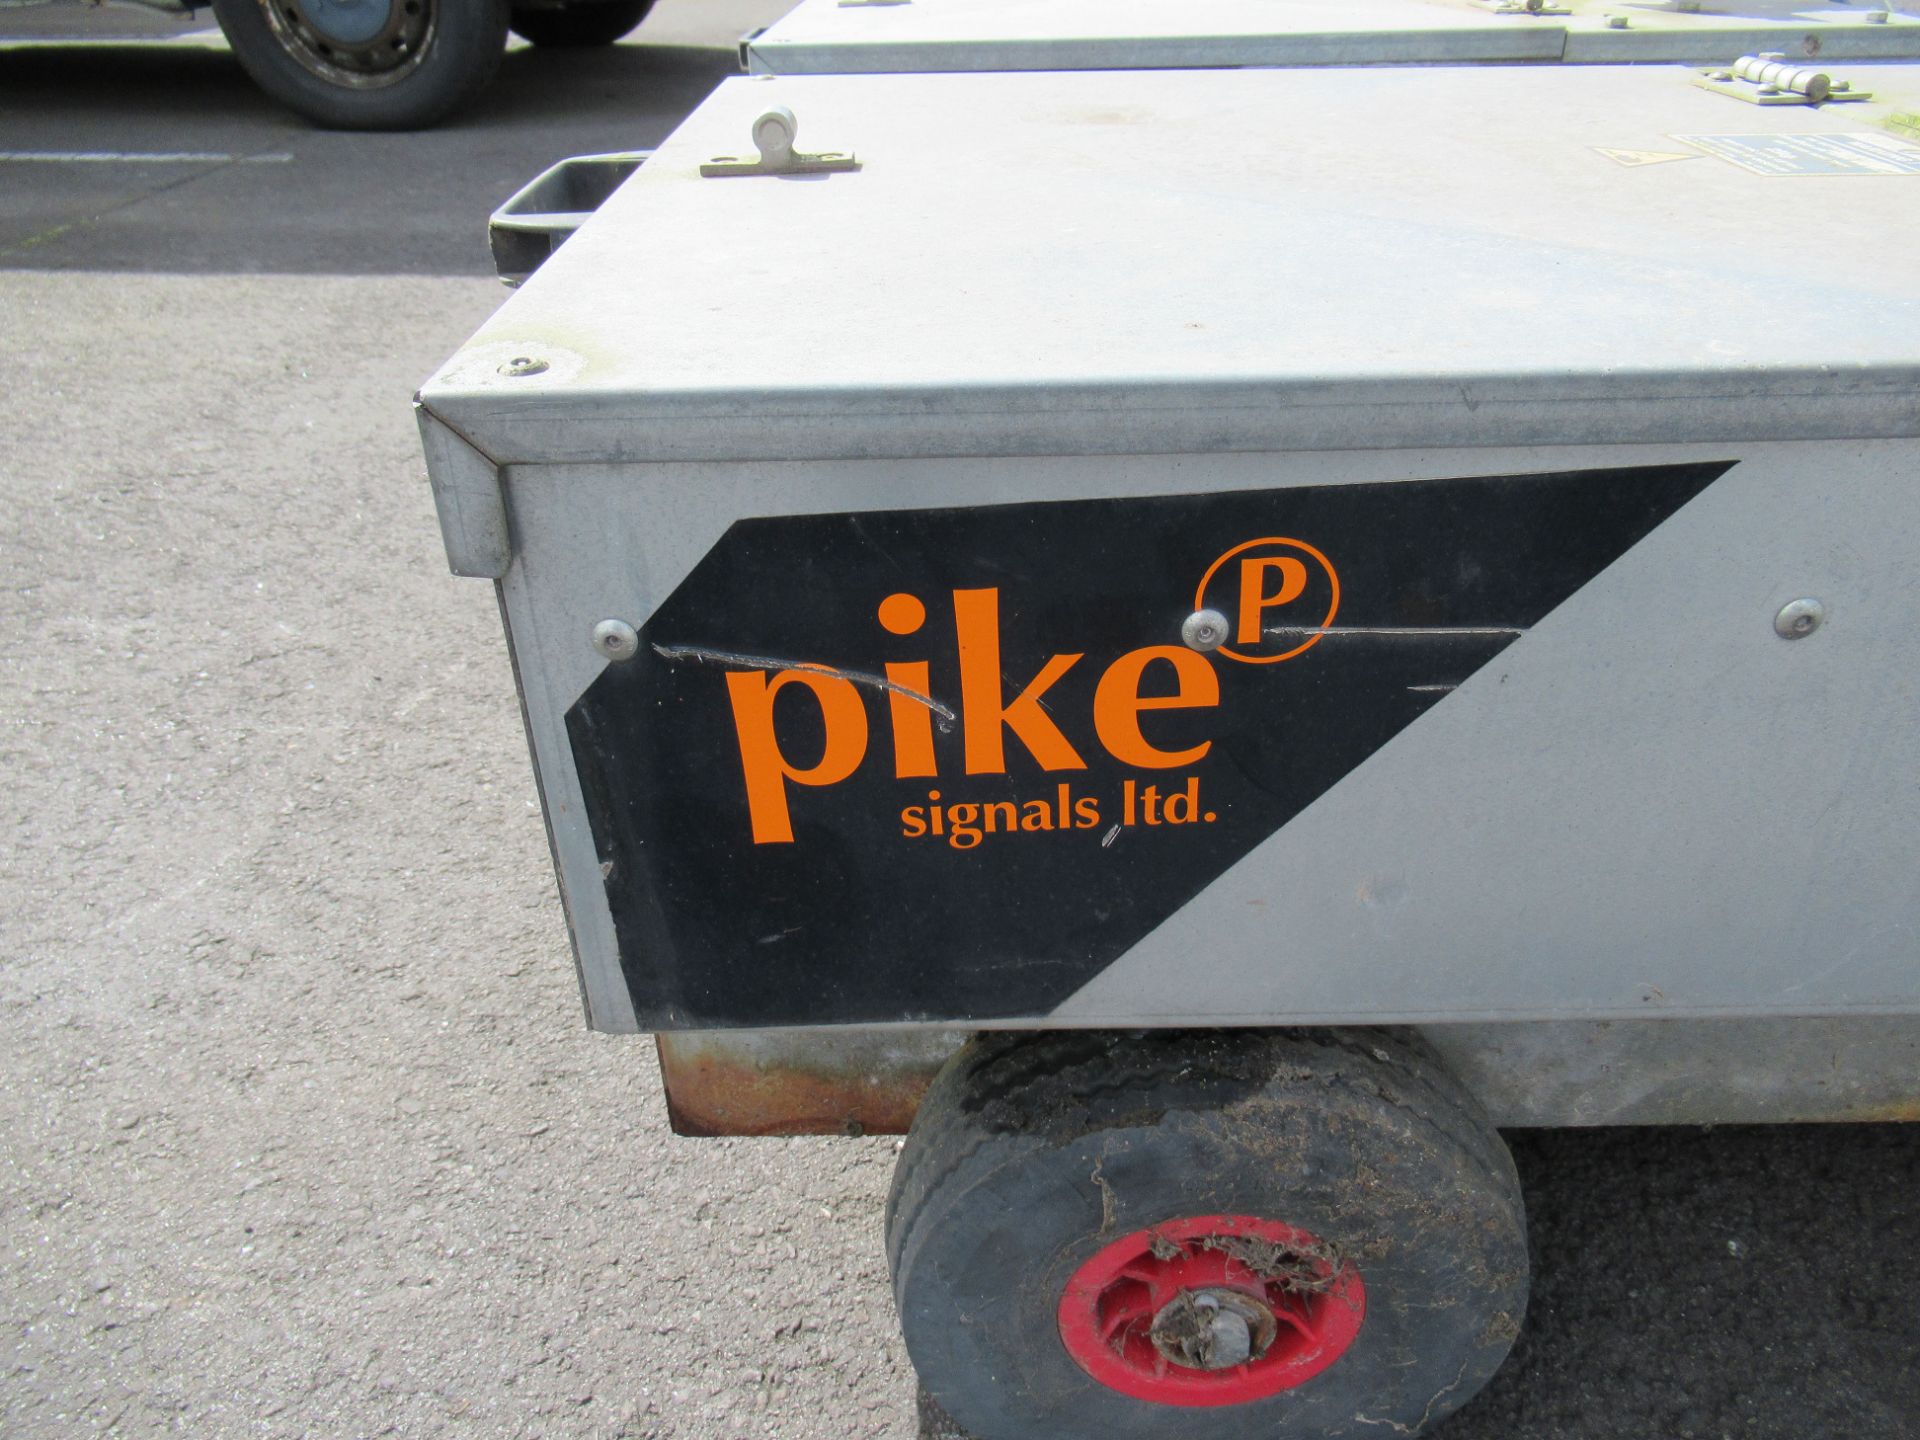 A Pair of Pike Signals Ltd "Pedestrian" Battery Powered Portable Traffic Light Units - Image 3 of 7